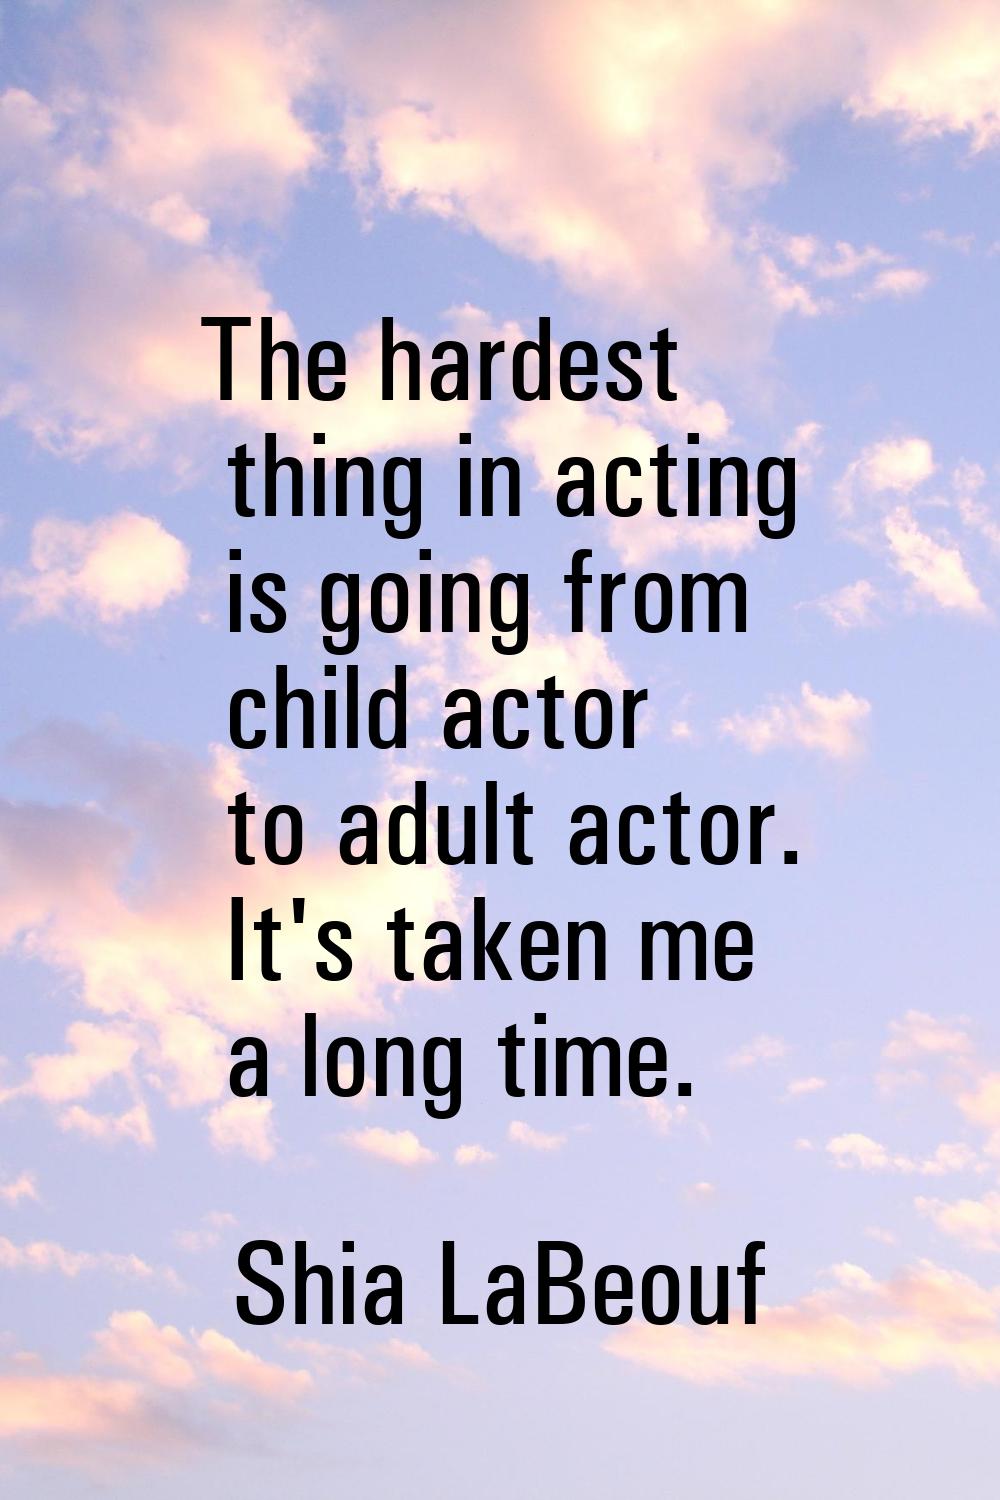 The hardest thing in acting is going from child actor to adult actor. It's taken me a long time.